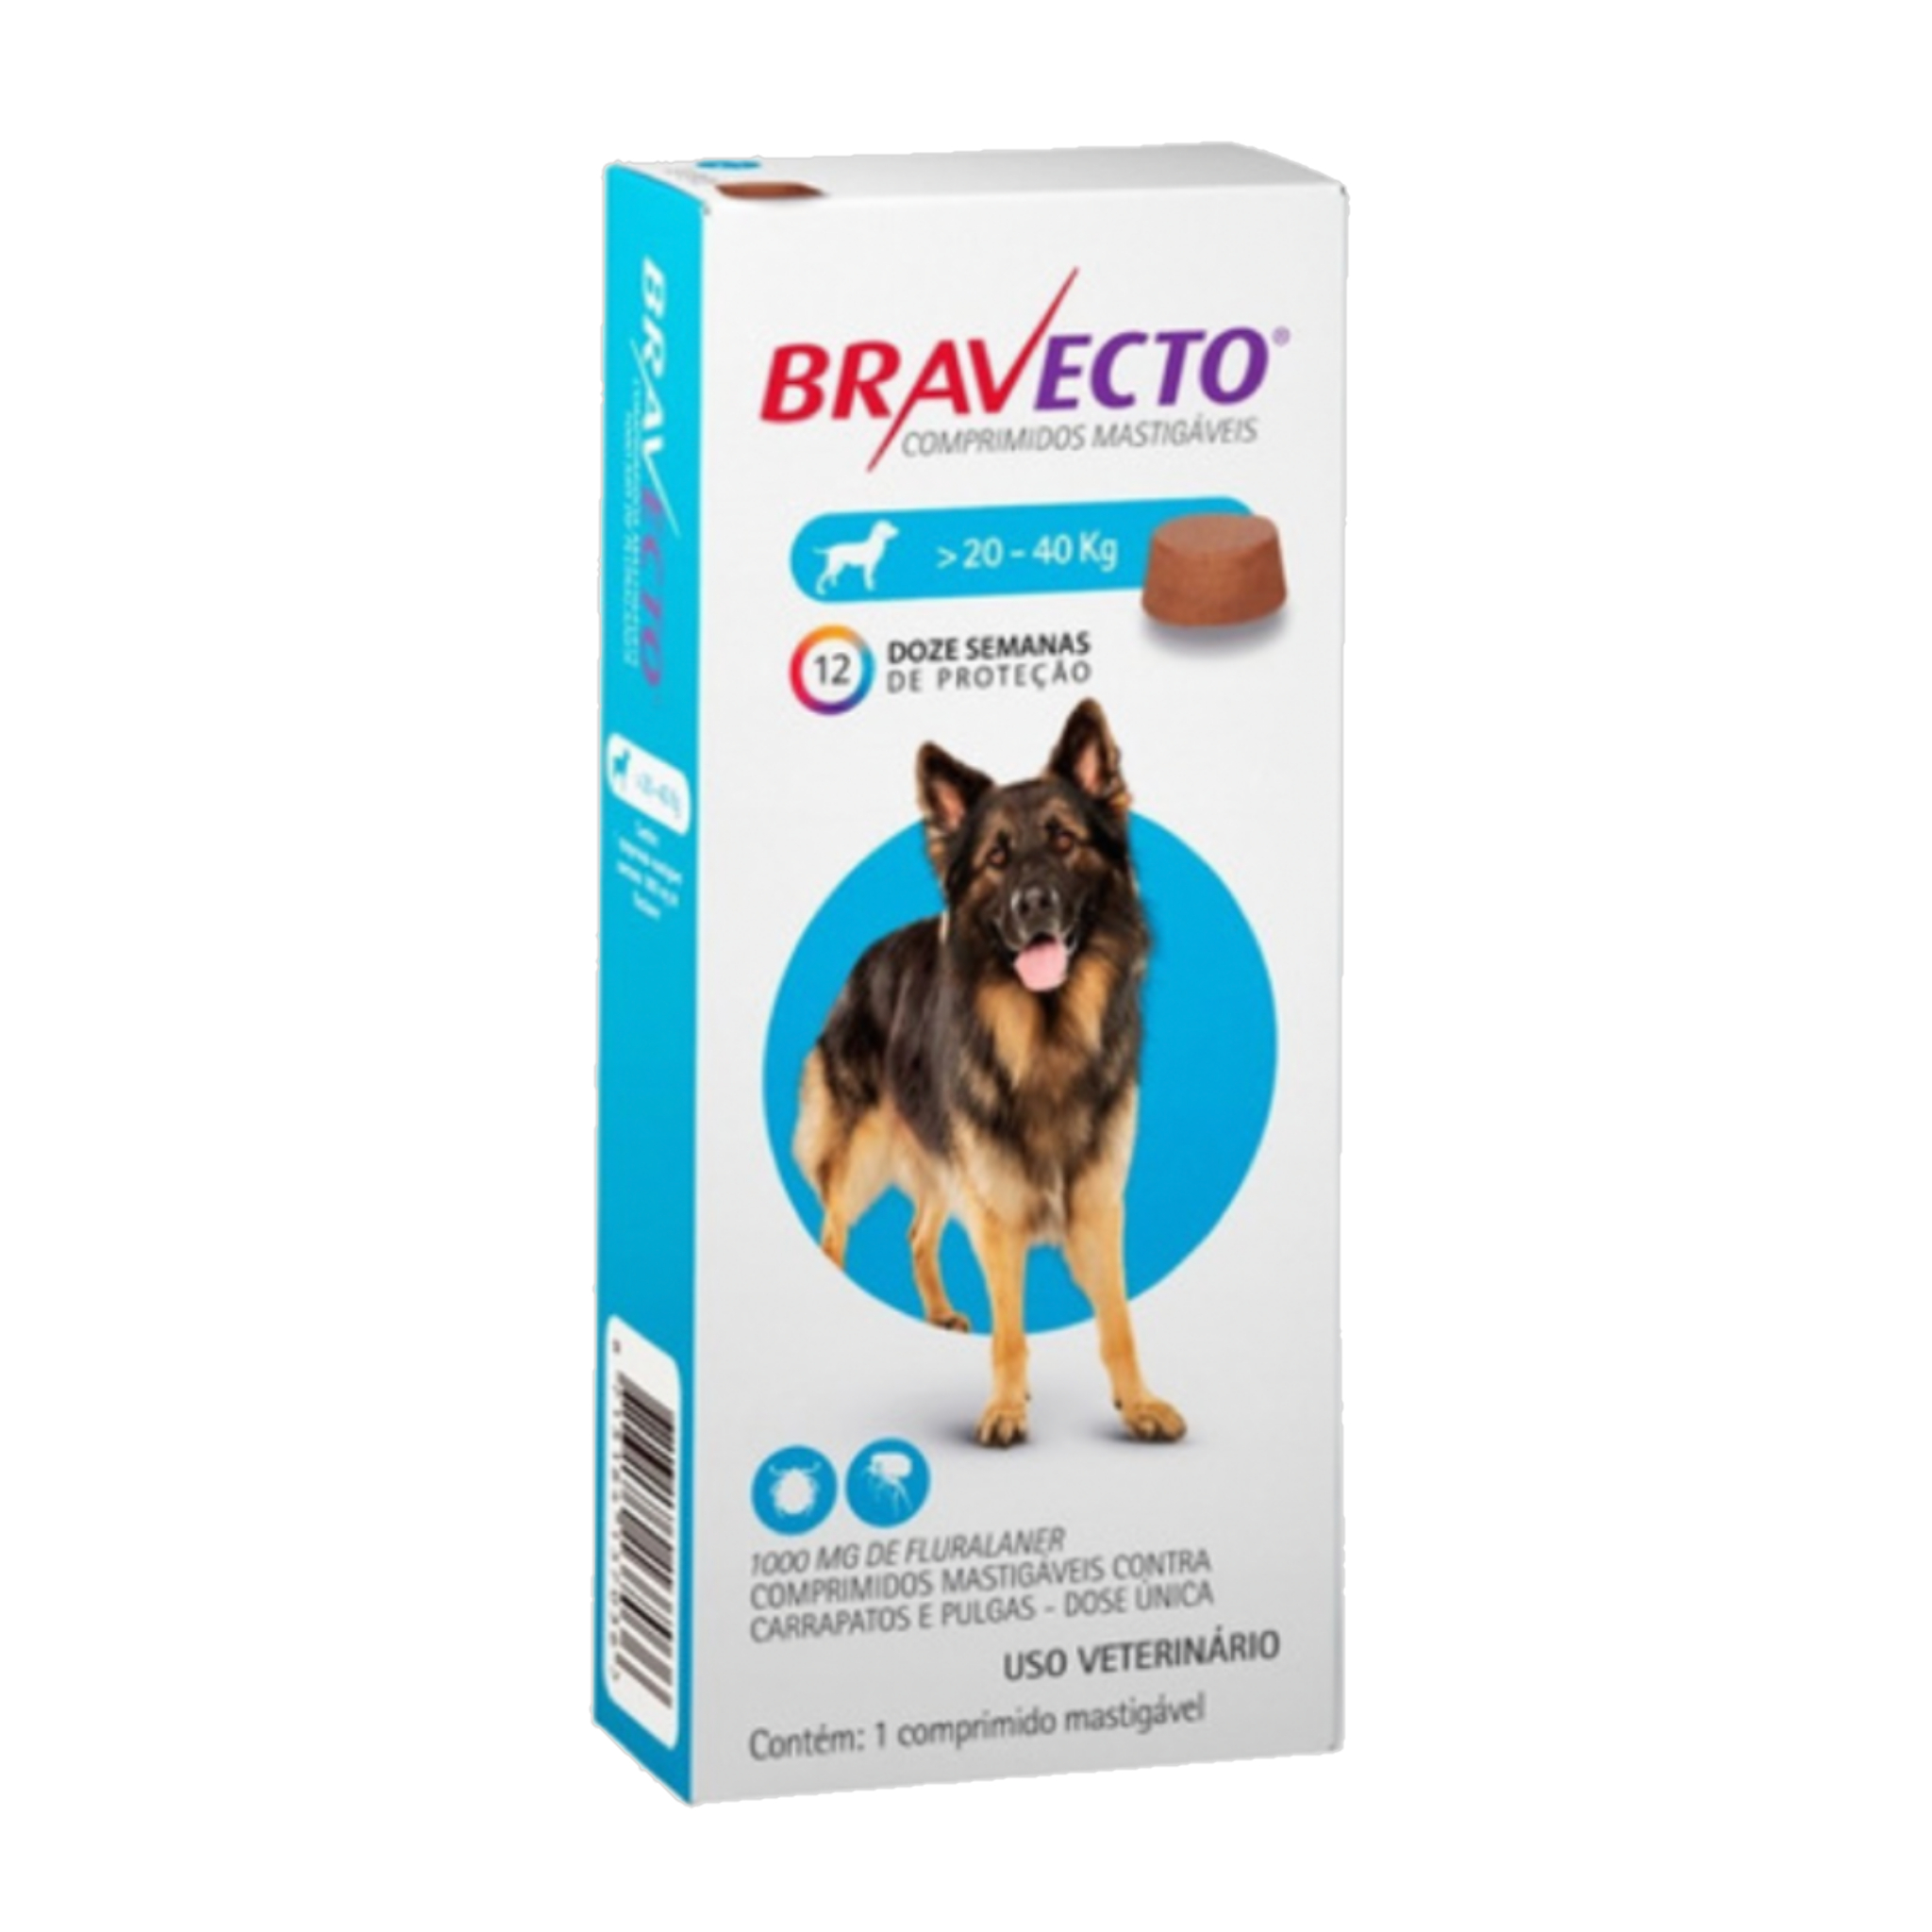 bravecto-comprar-1-9-out-of-5-stars-from-389-genuine-reviews-on